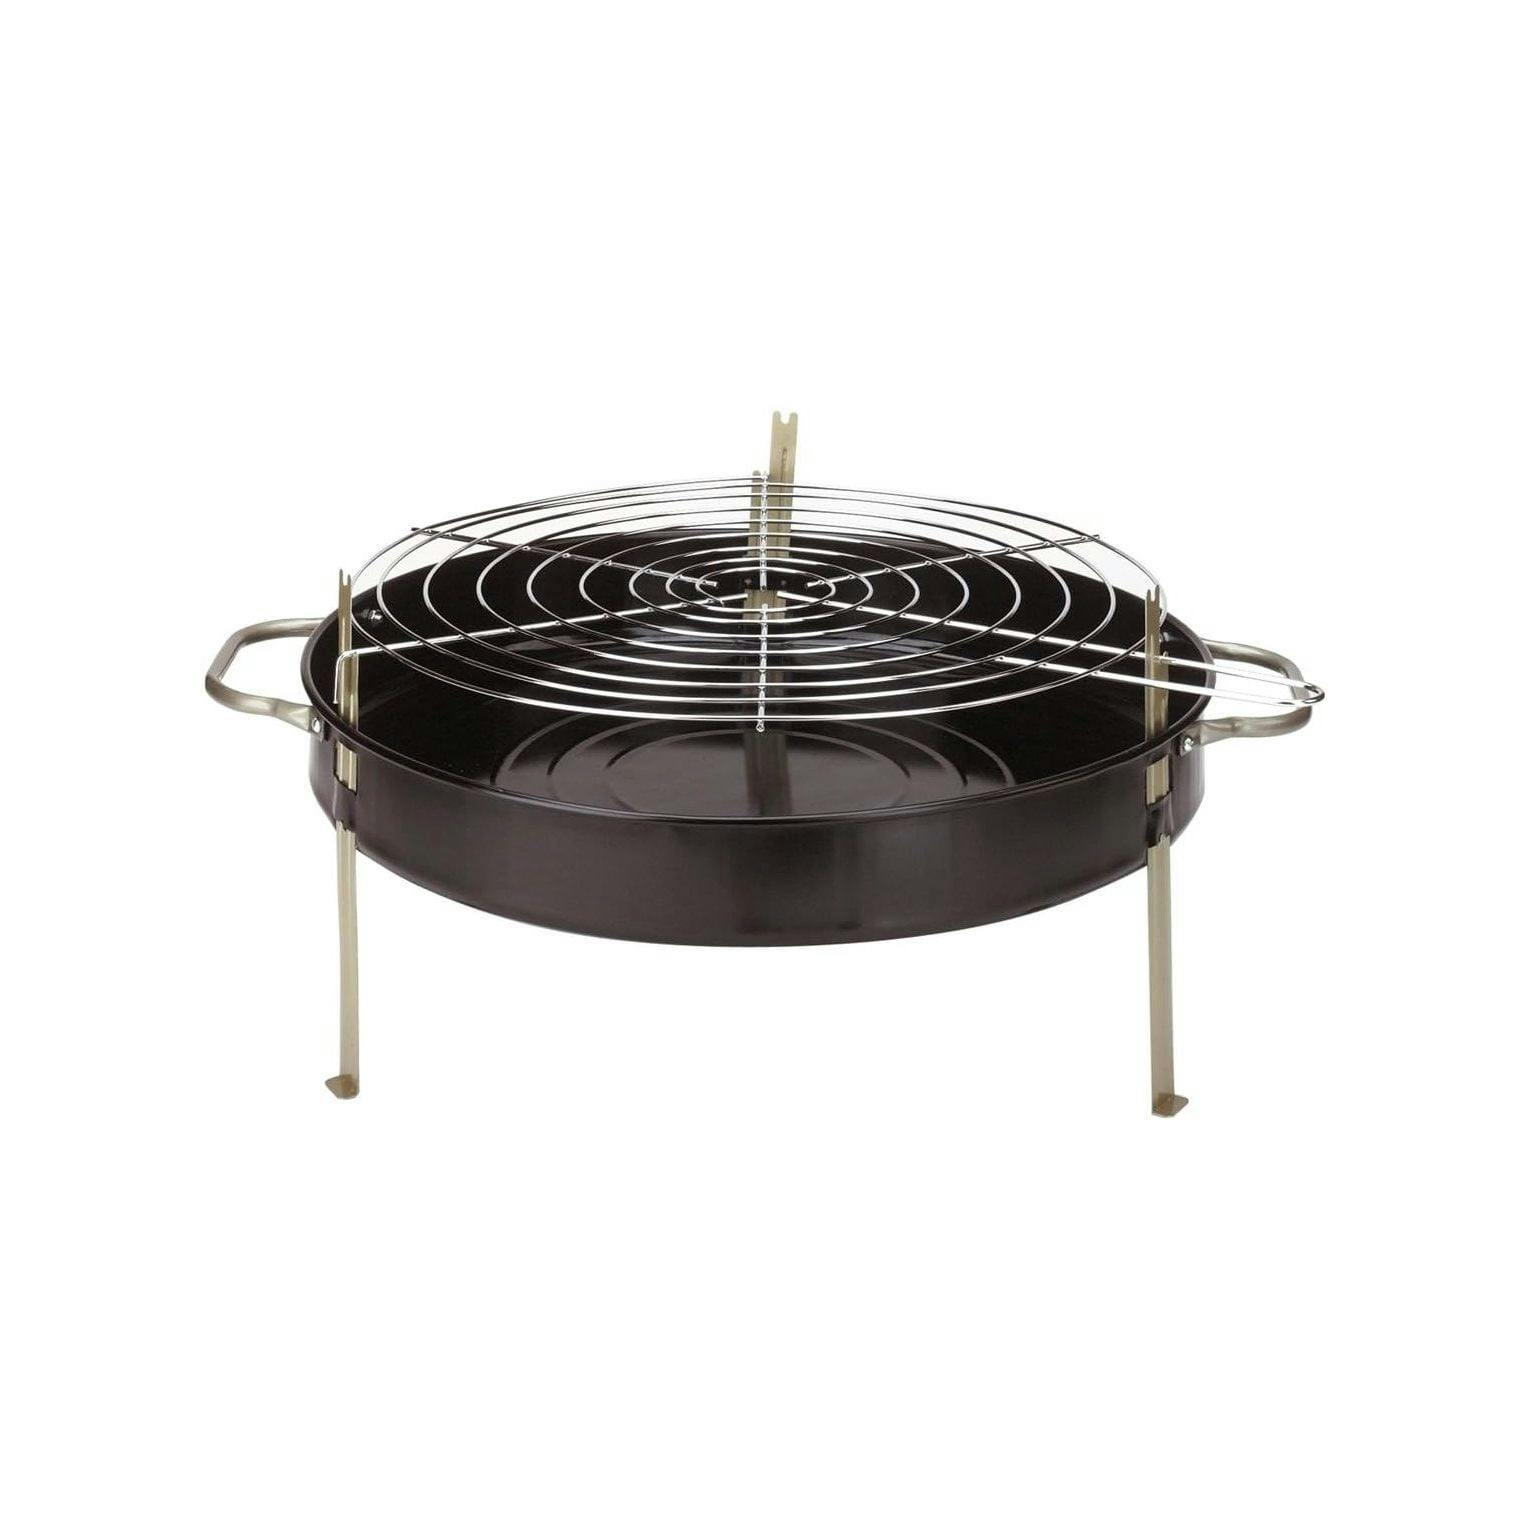 Compact 18" Portable Charcoal Grill in Sleek Black Steel